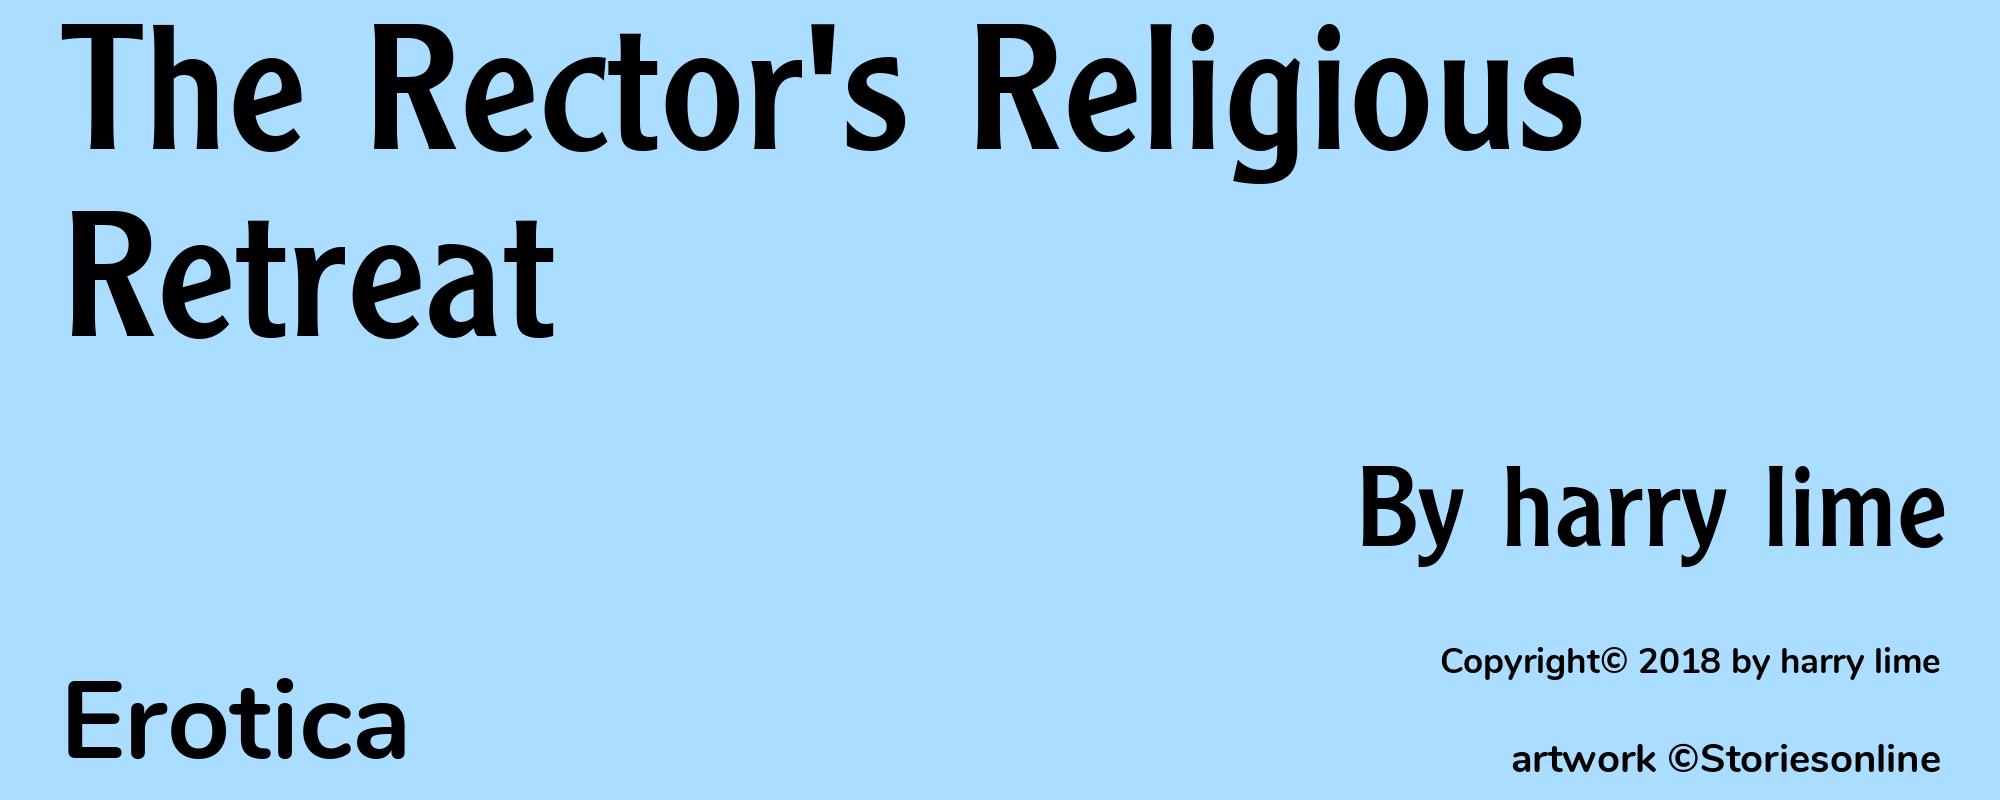 The Rector's Religious Retreat - Cover